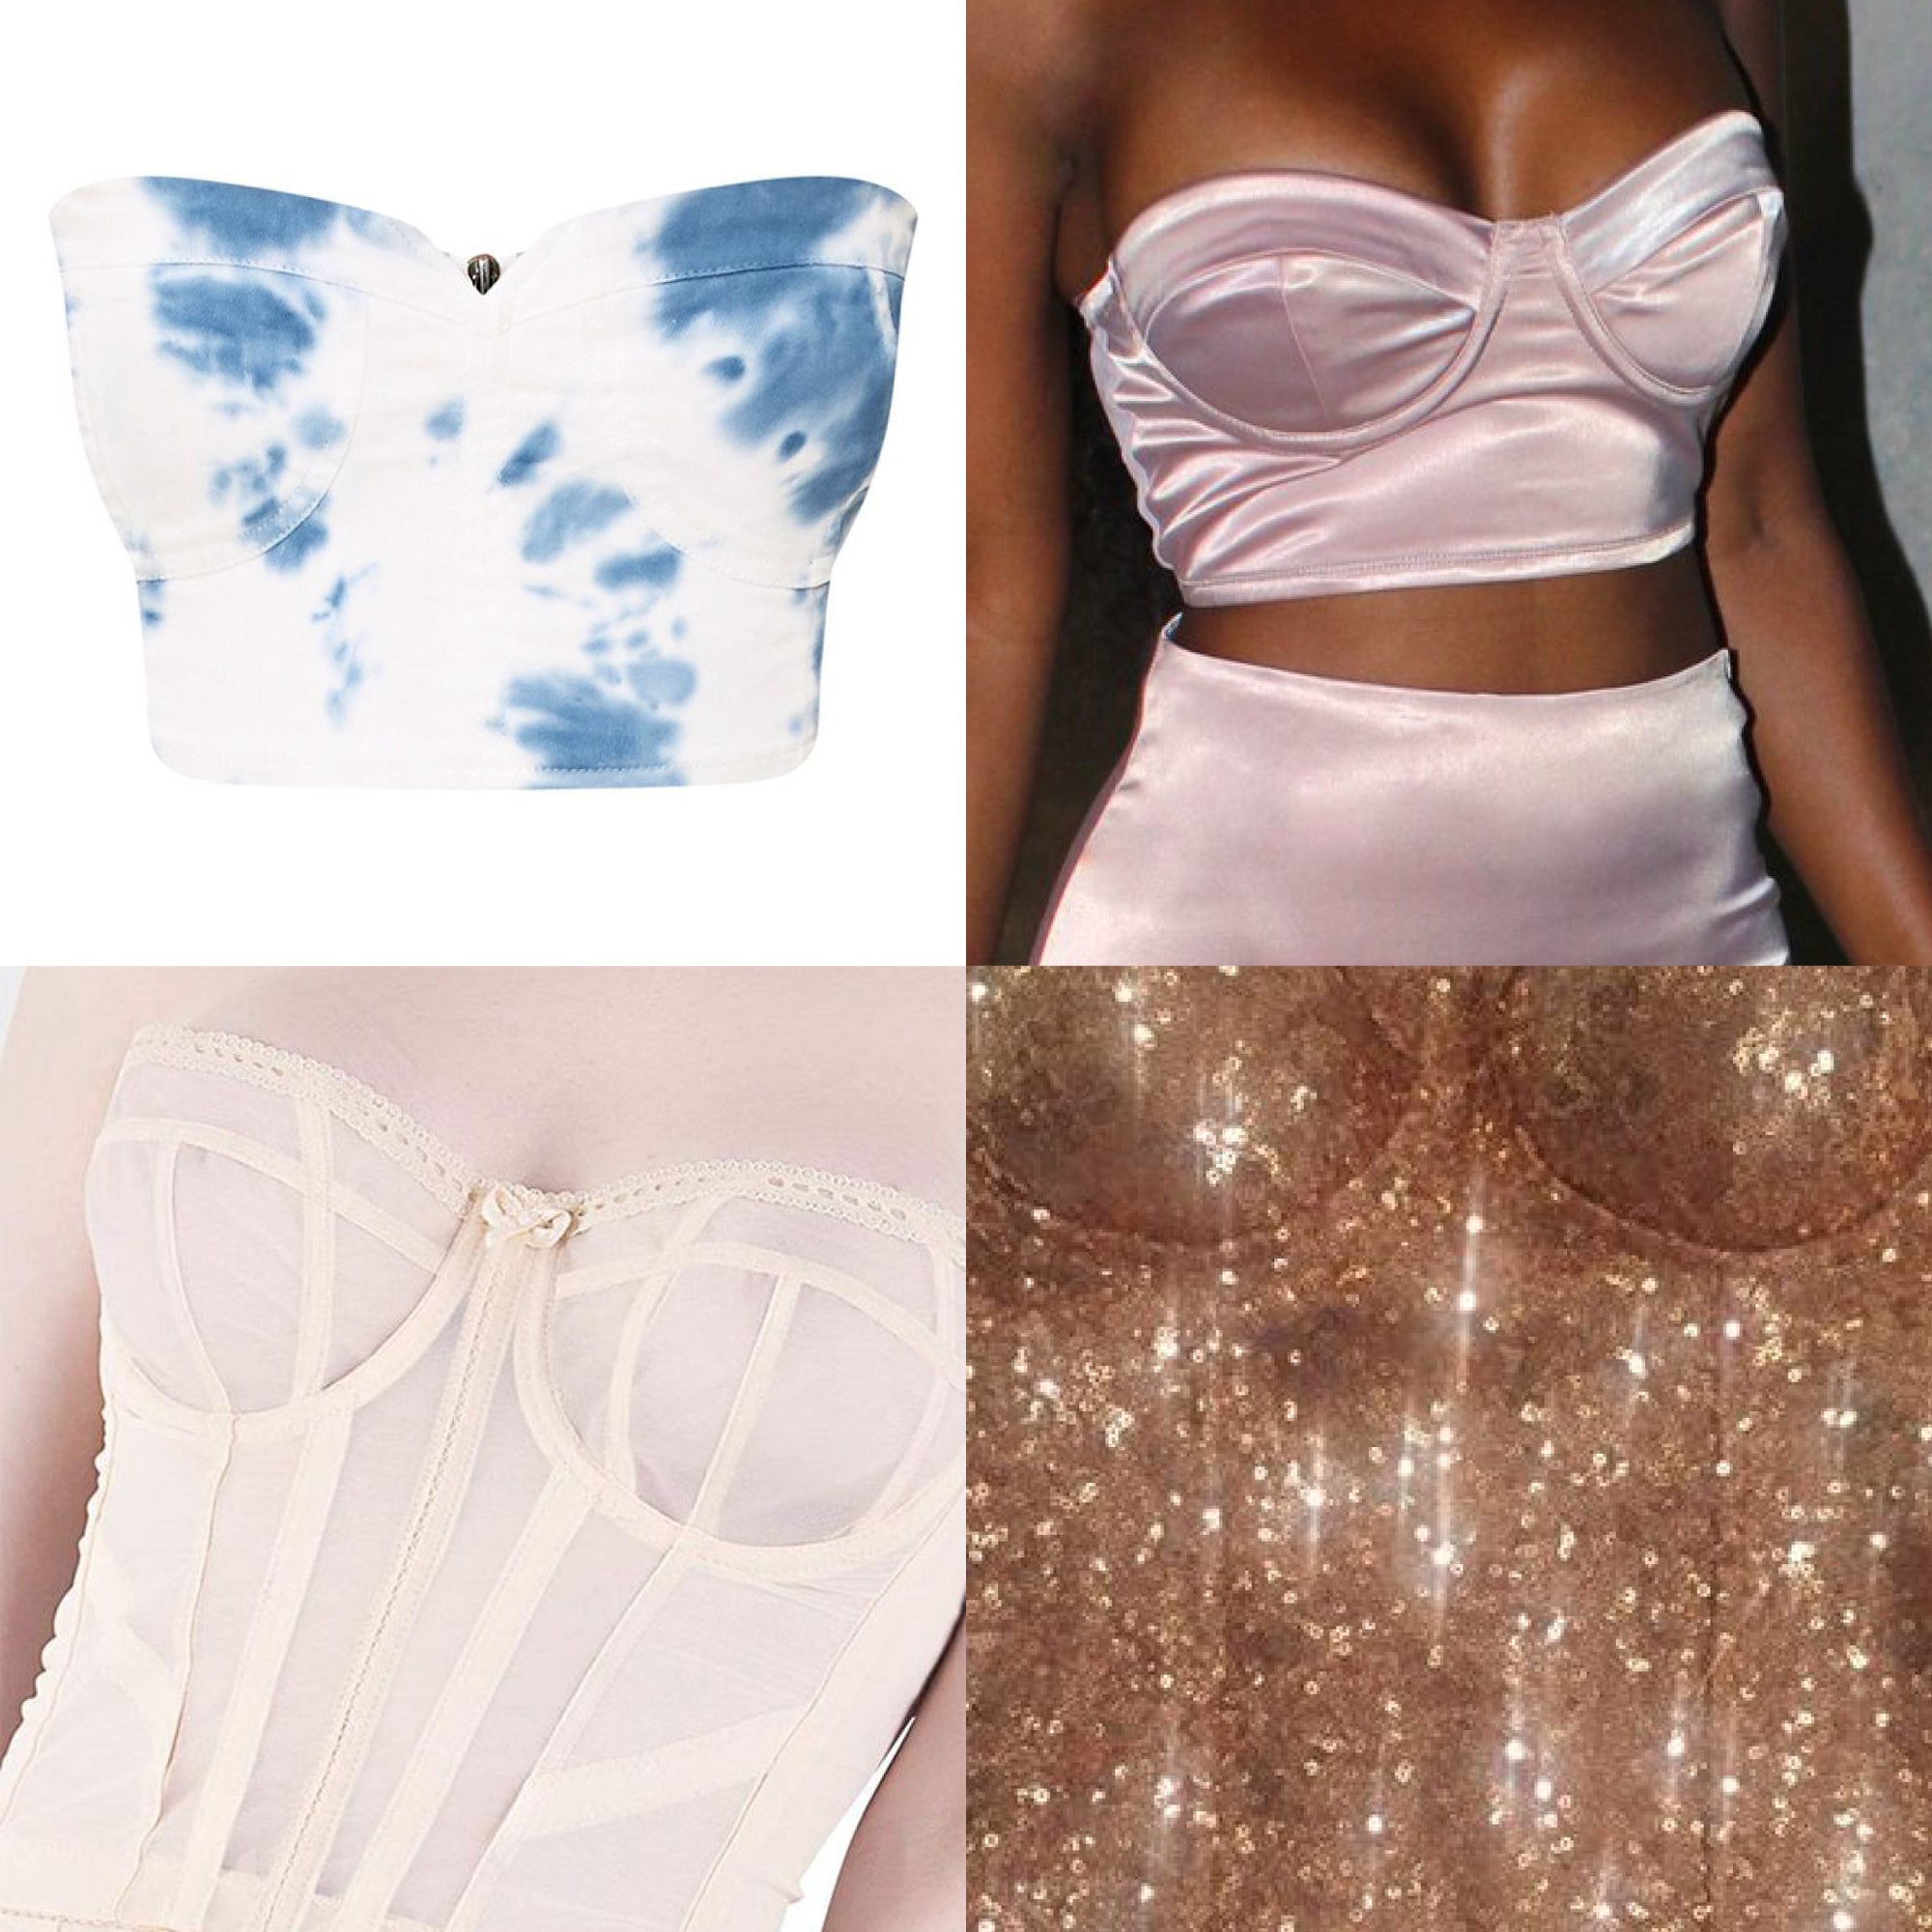 Get the look! Pattern Modifications for the Esplanade Bra